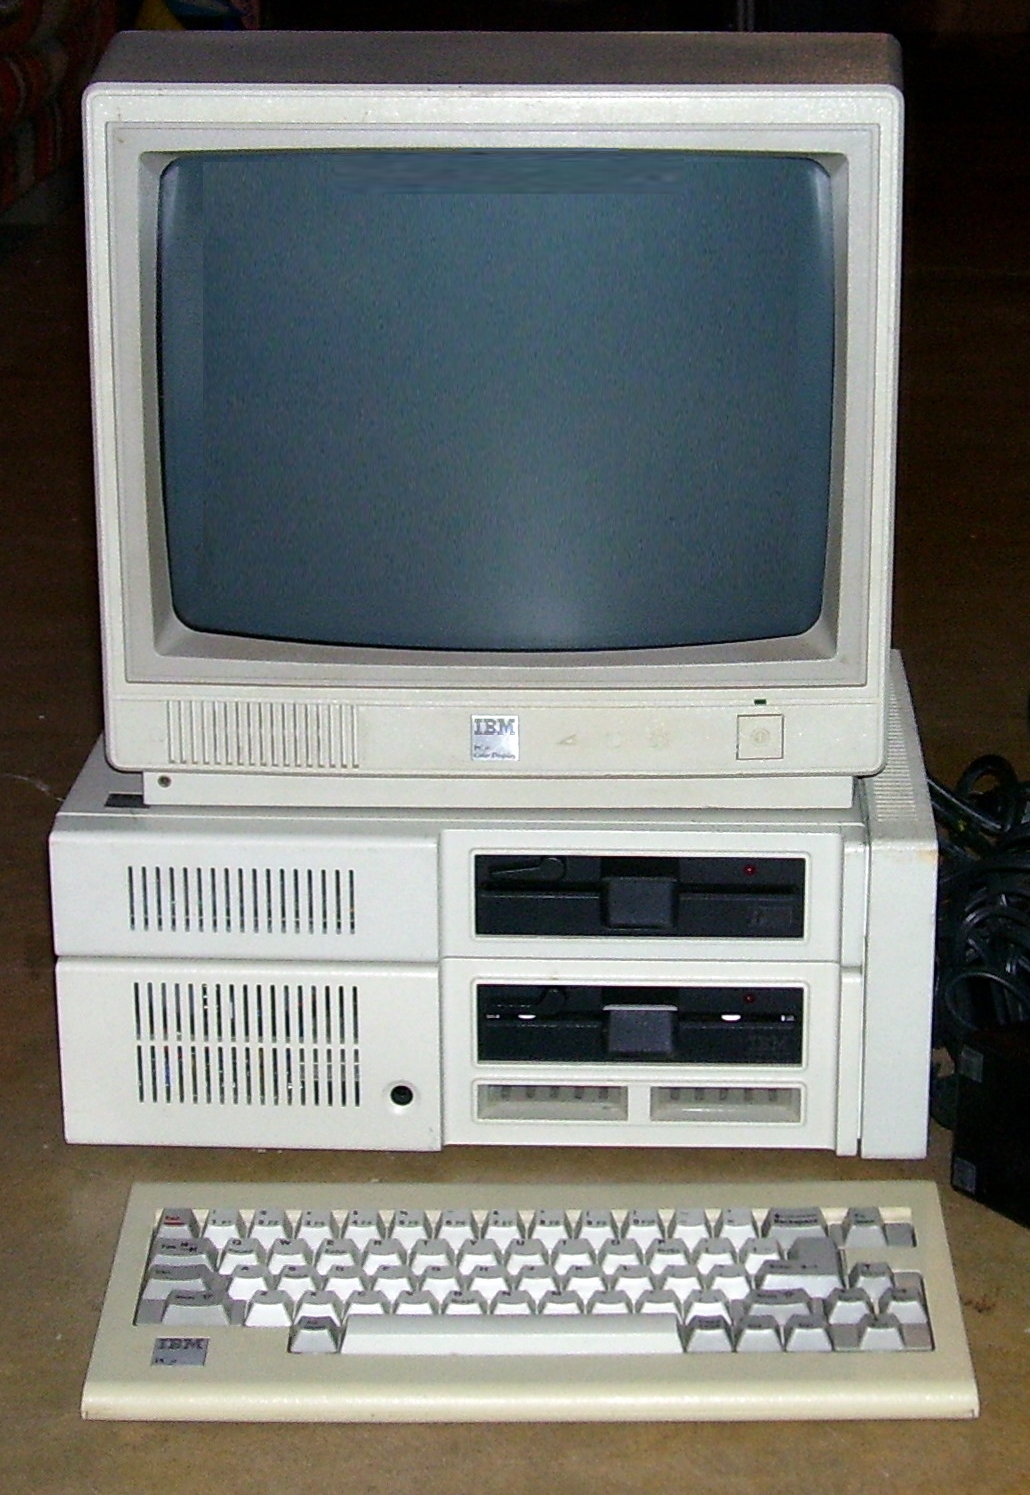 PCjr_expanded_cropped.jpg